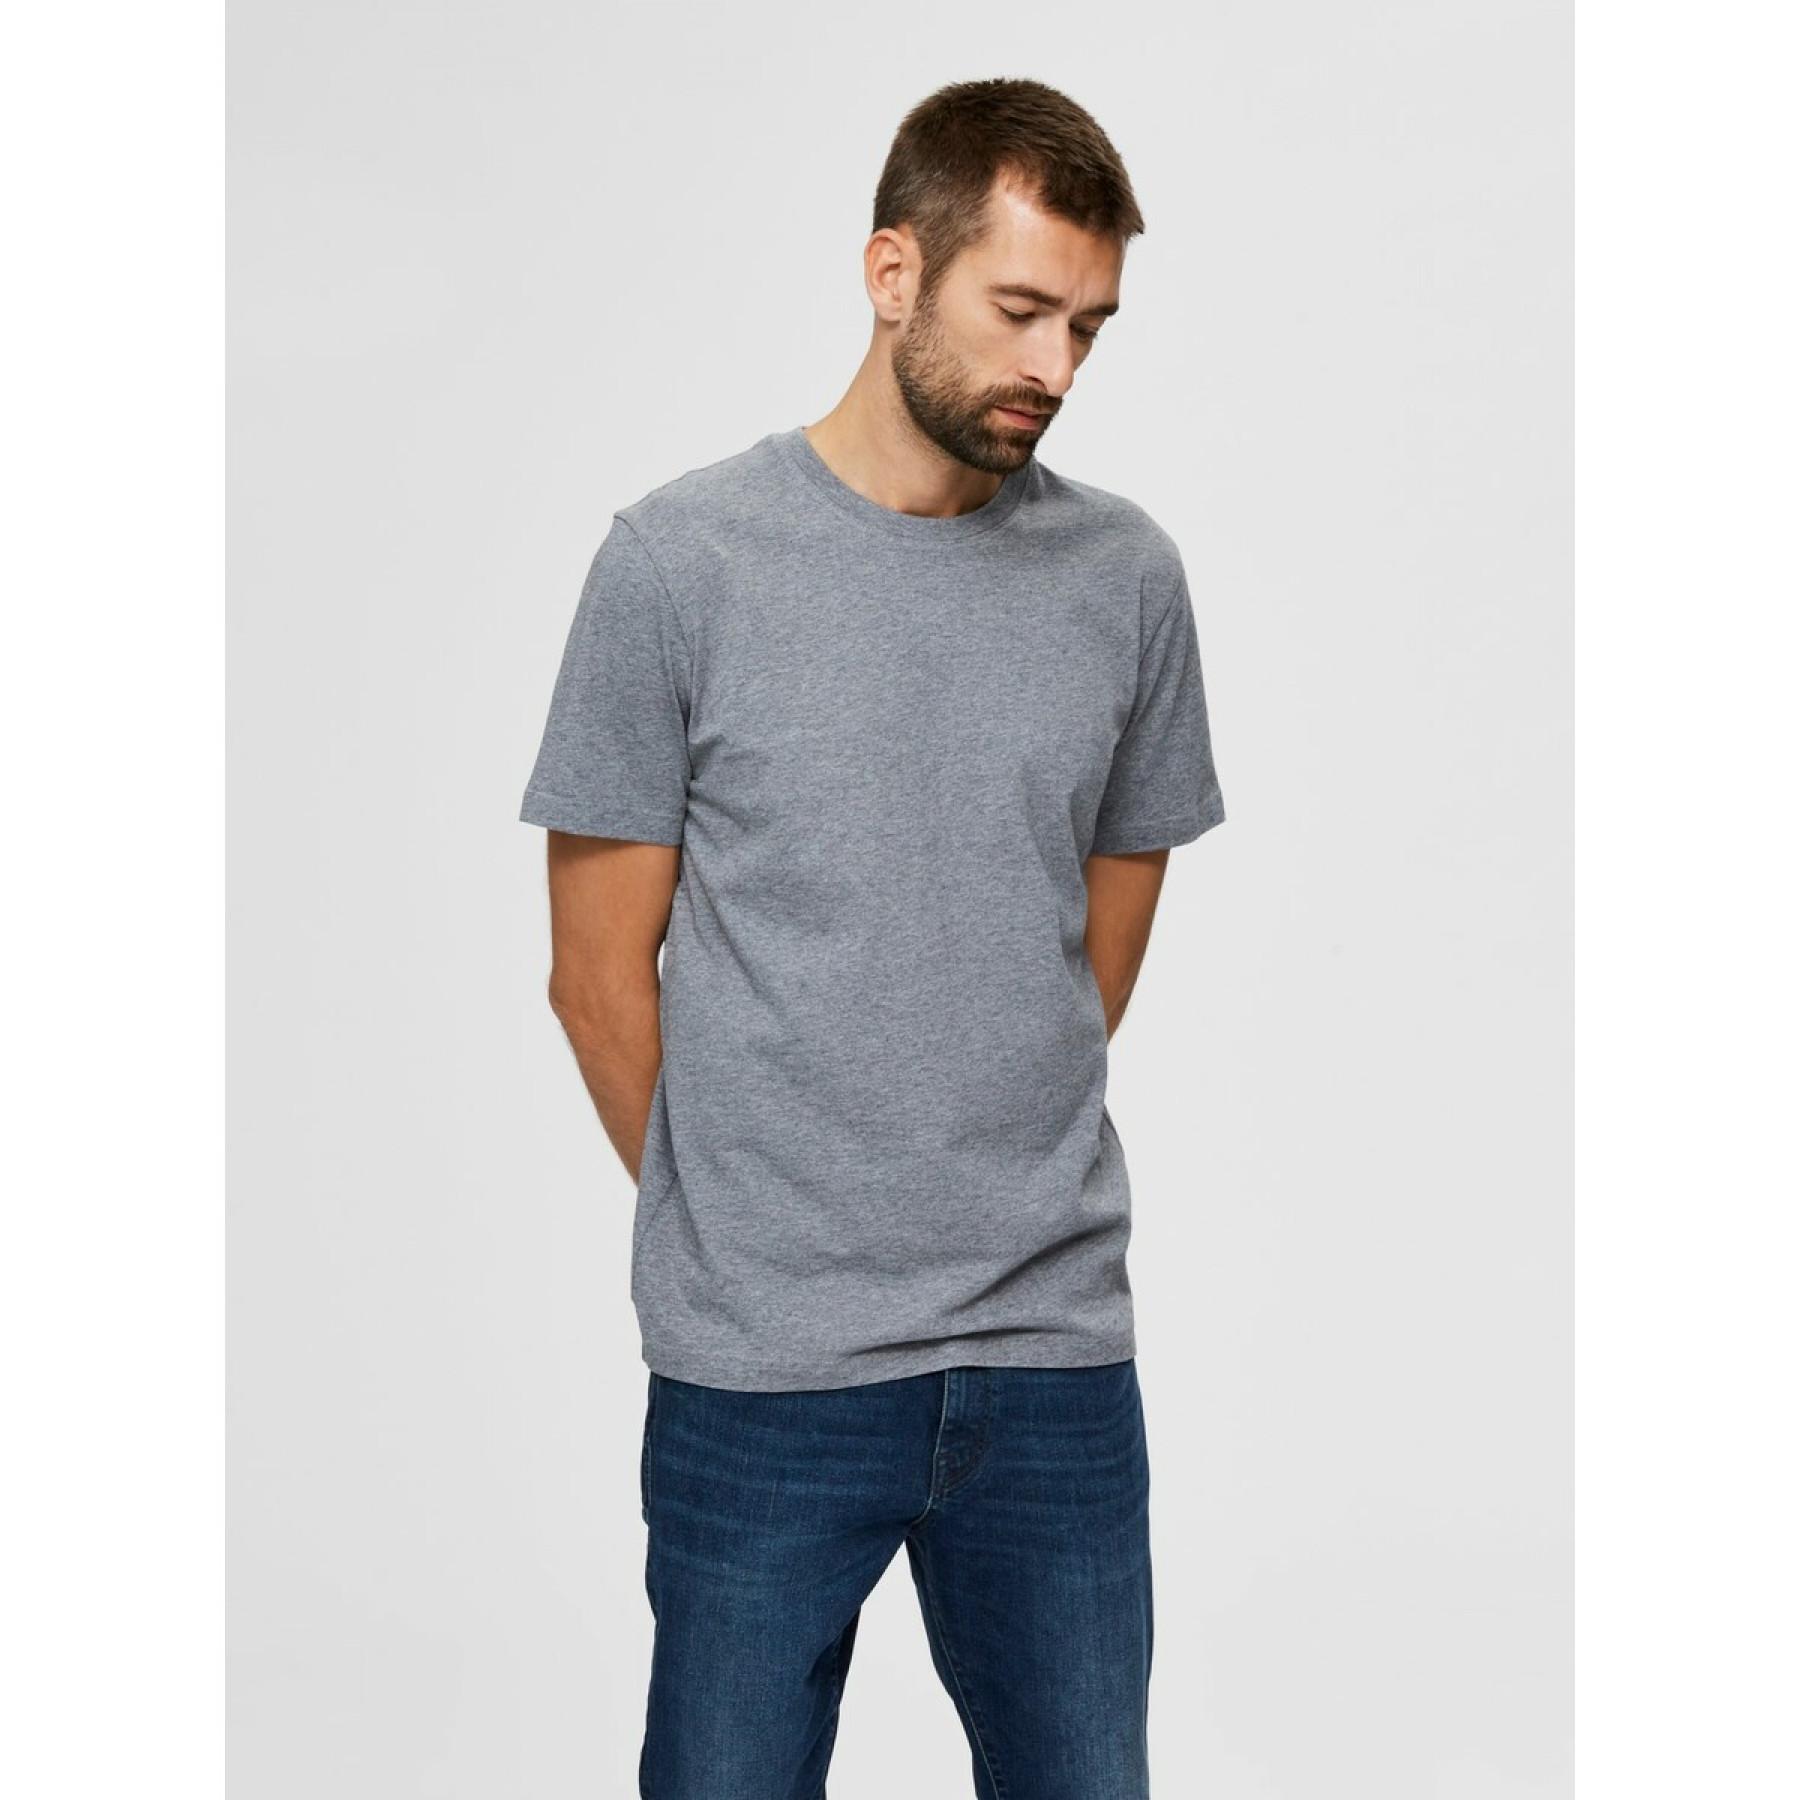 T-shirt Selected manches courtes Col rond Norman 180